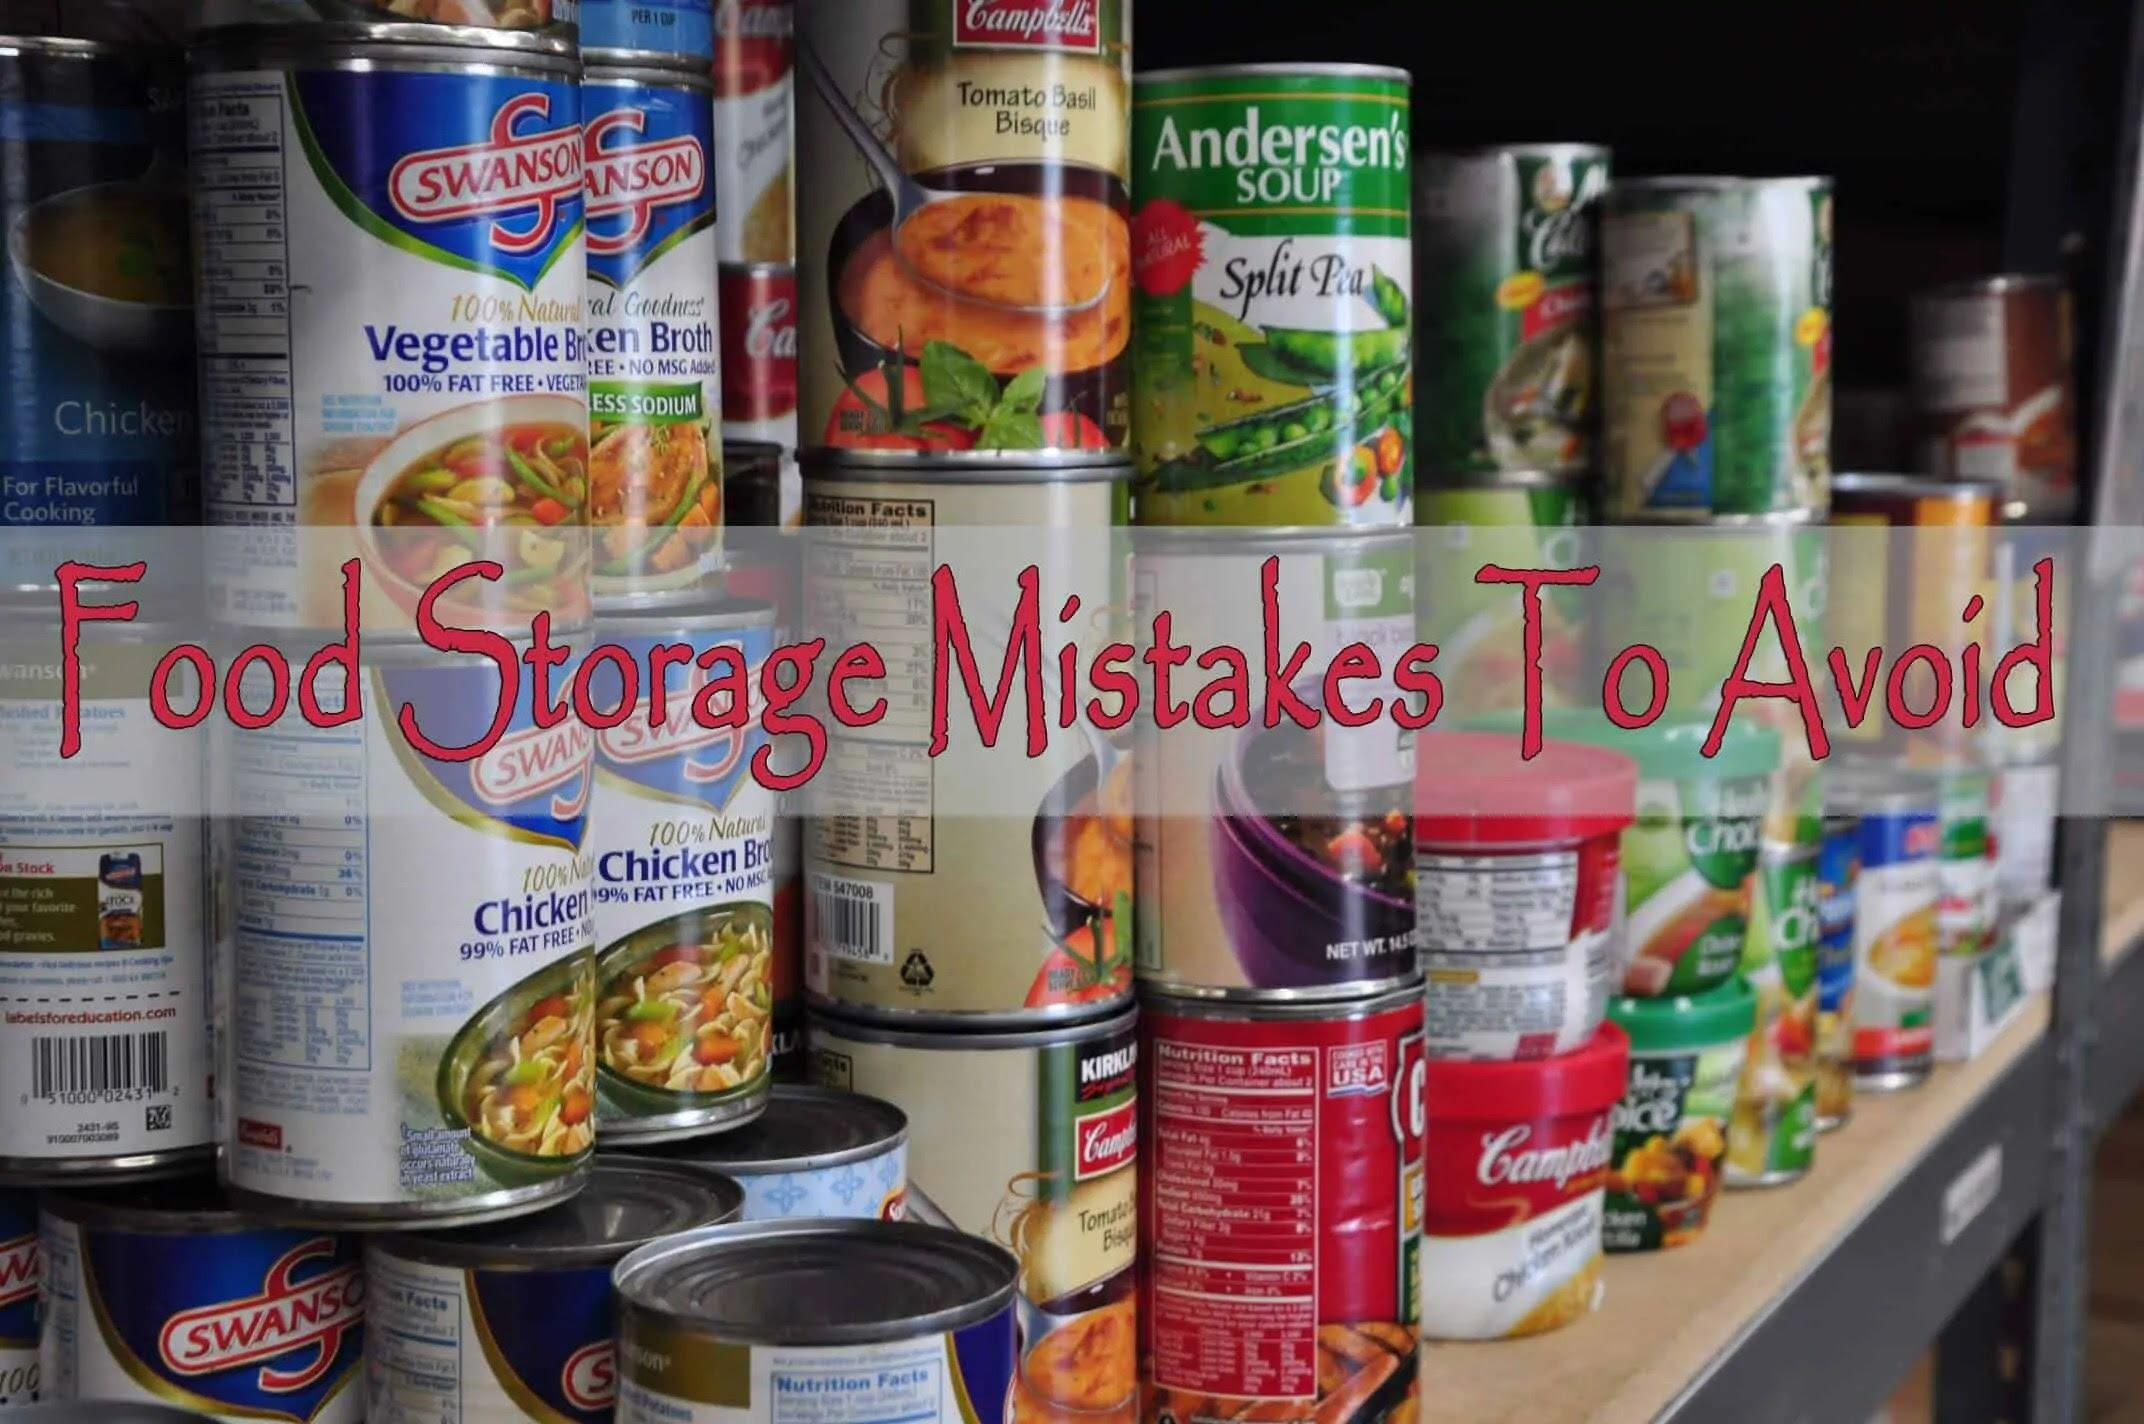 The food storage mistakes one should avoid